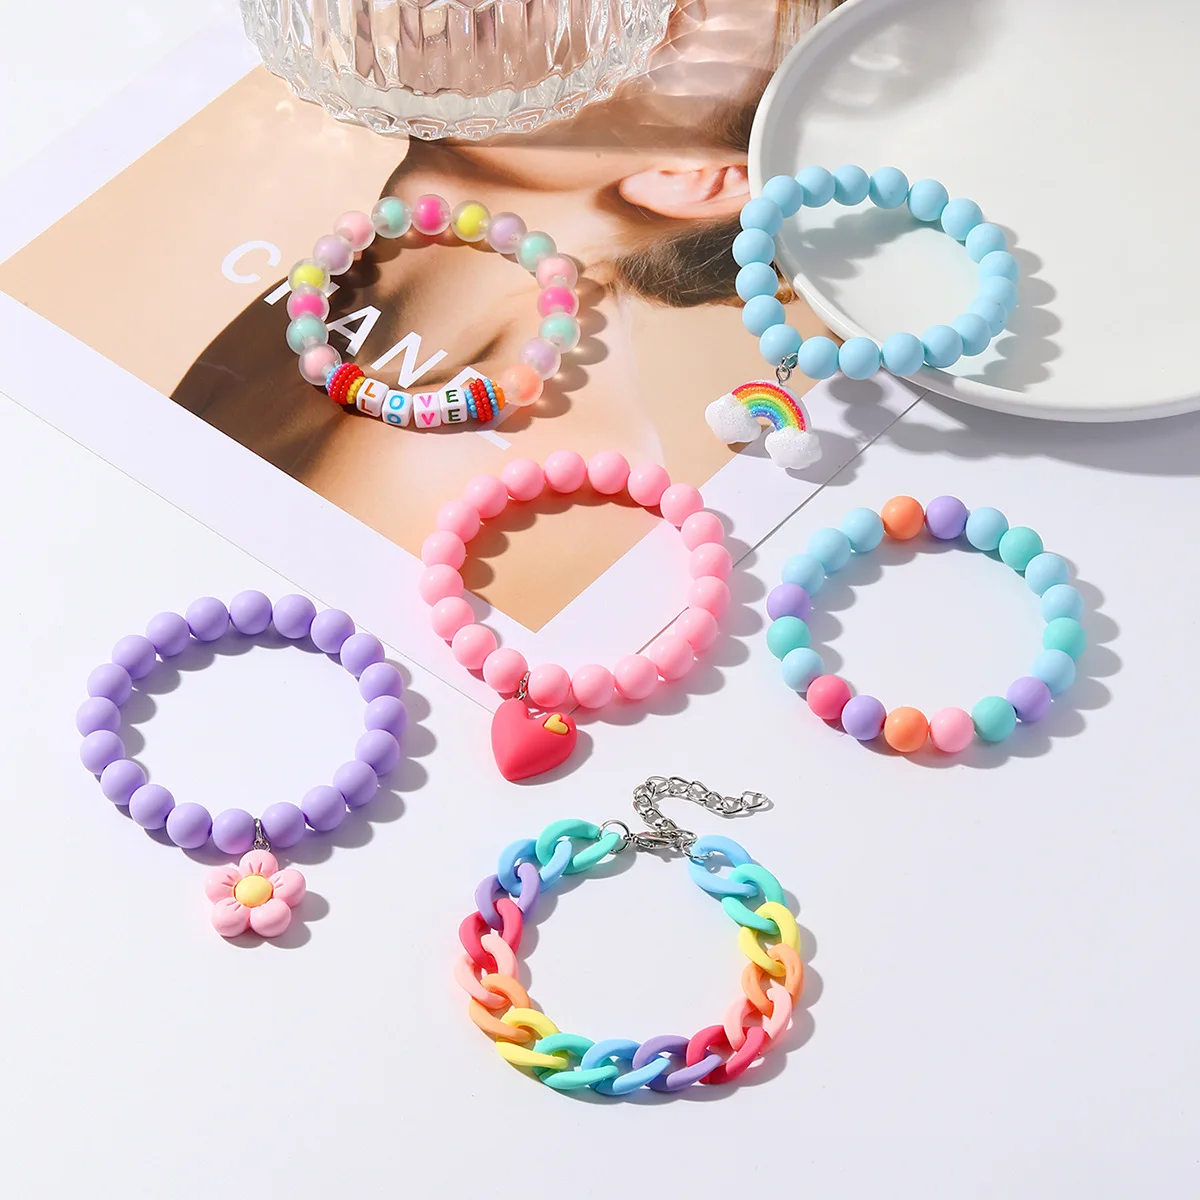 Wholesale Cheap Fashion Women Jewelry Cute Girls Colorful Rainbow Heart and Flower Charm Bead Bracelet For Kids